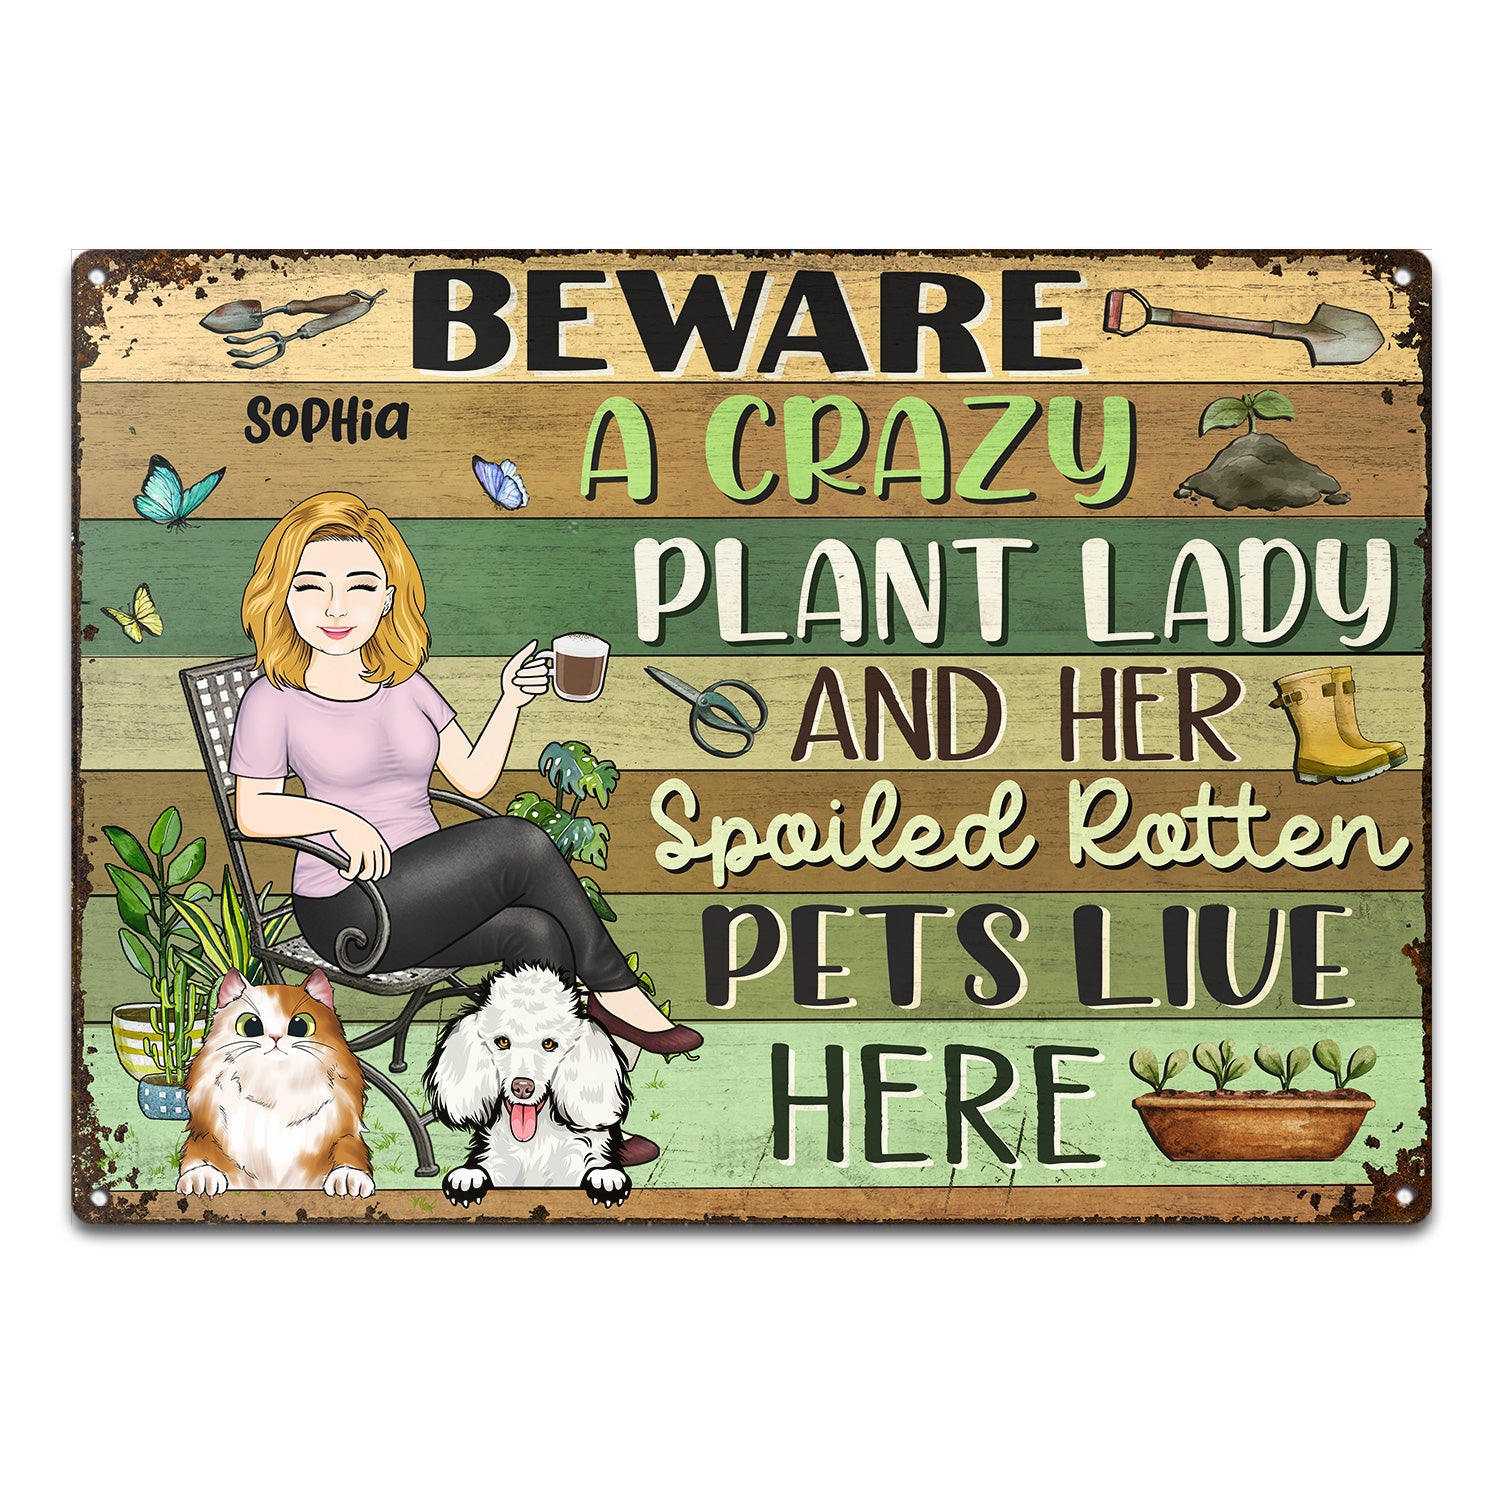 Beware A Crazy Plant Lady & Her Spoiled Rotten Dogs Cats Live Here Gardening - Garden Sign, Birthday, Housewarming Gift For Her, Him, Gardener, Outdoor Decor - Personalized Custom Classic Metal Signs